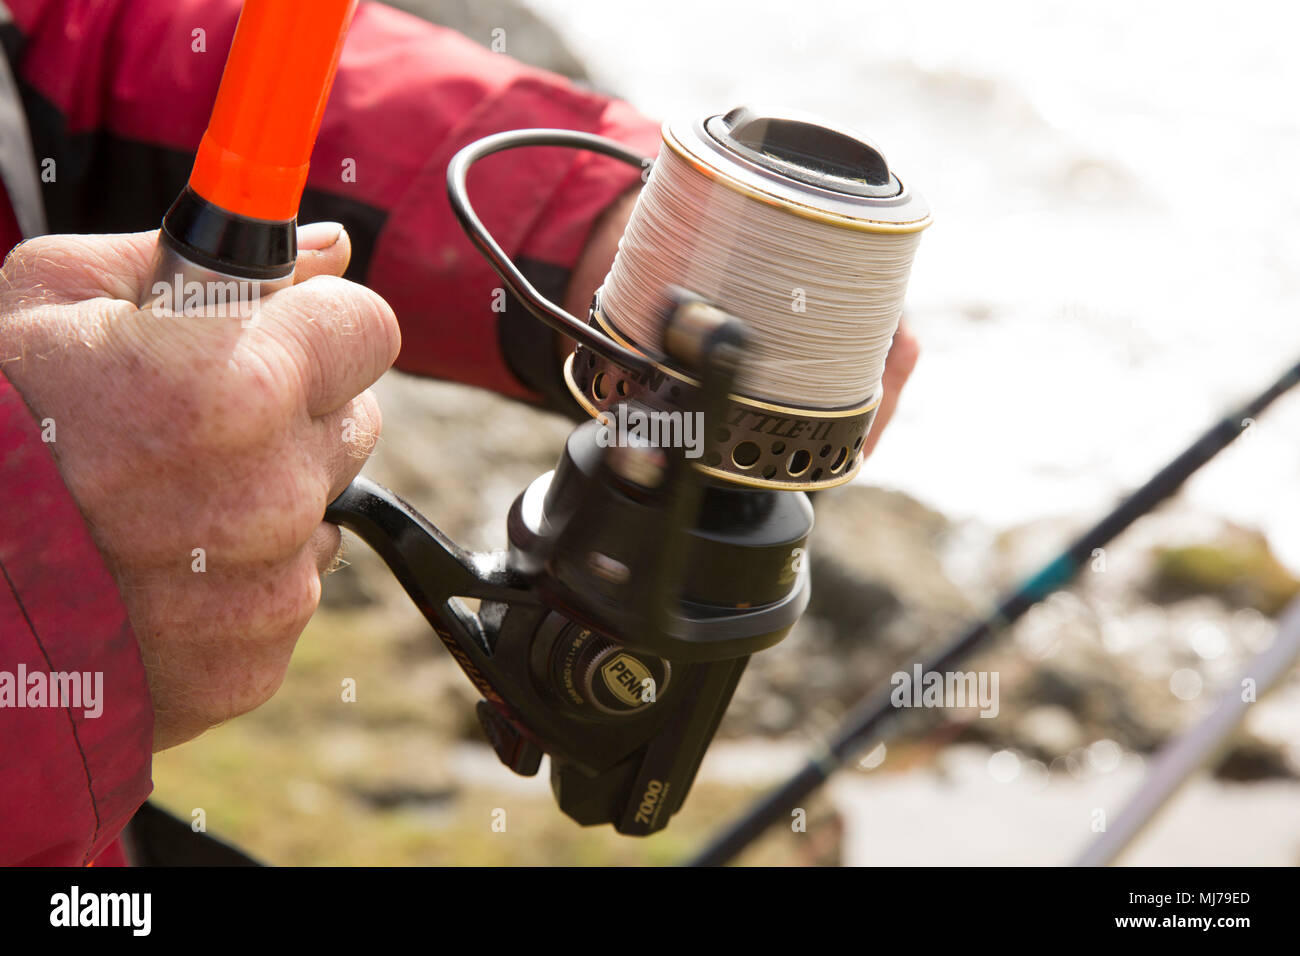 https://c8.alamy.com/comp/MJ79ED/a-sea-angler-reeling-in-with-a-fixed-spool-reel-that-has-been-loaded-with-braided-fishing-line-while-shore-fishing-braided-fishing-lines-have-virtual-MJ79ED.jpg